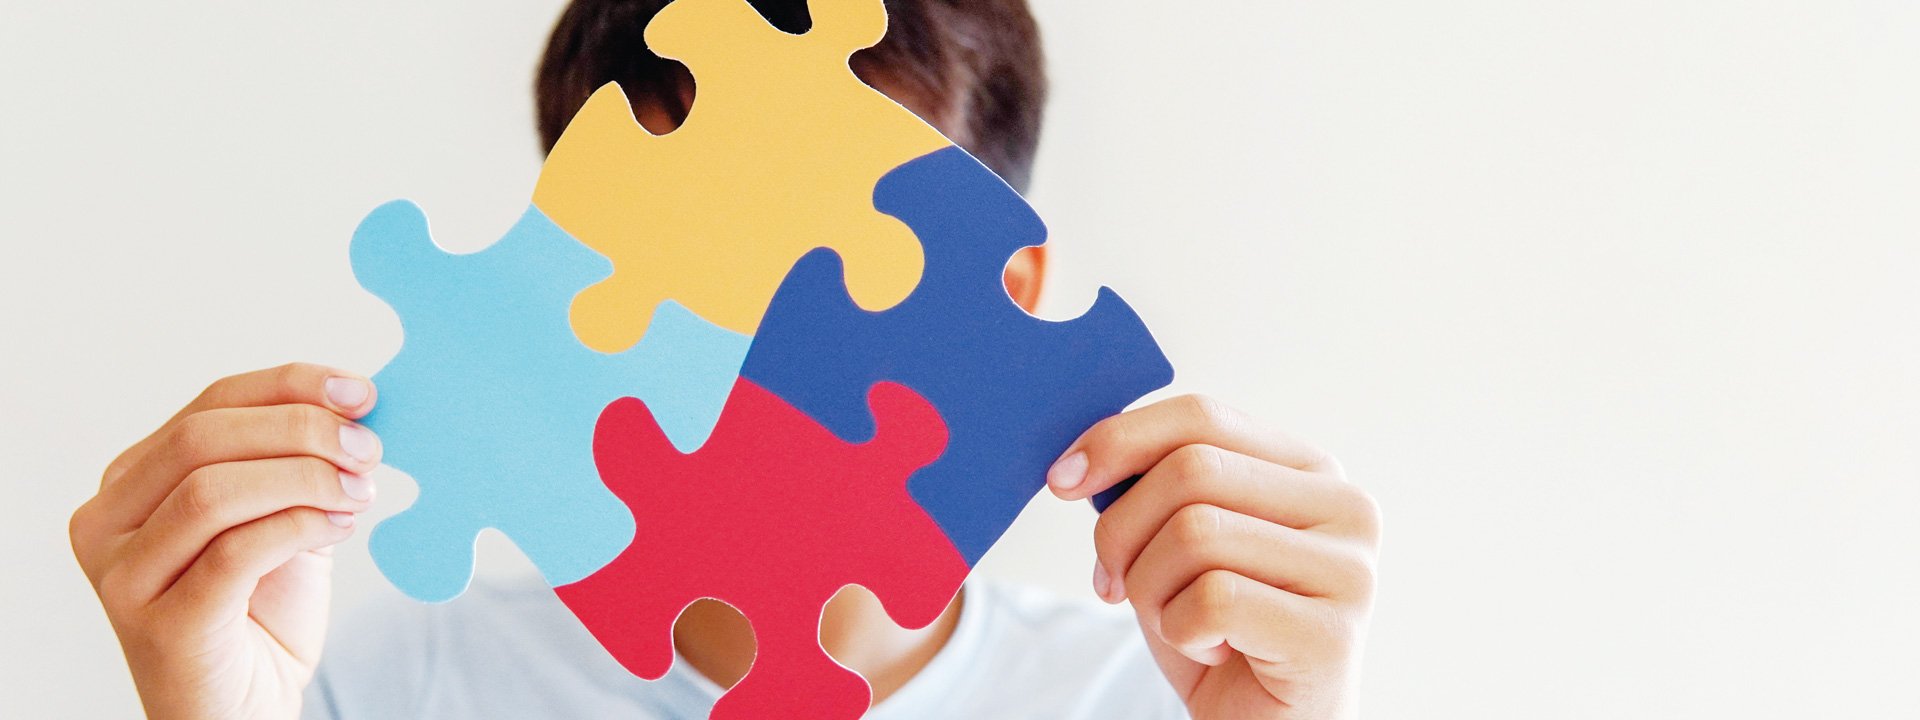 Person holding connected puzzle pieces in front of face